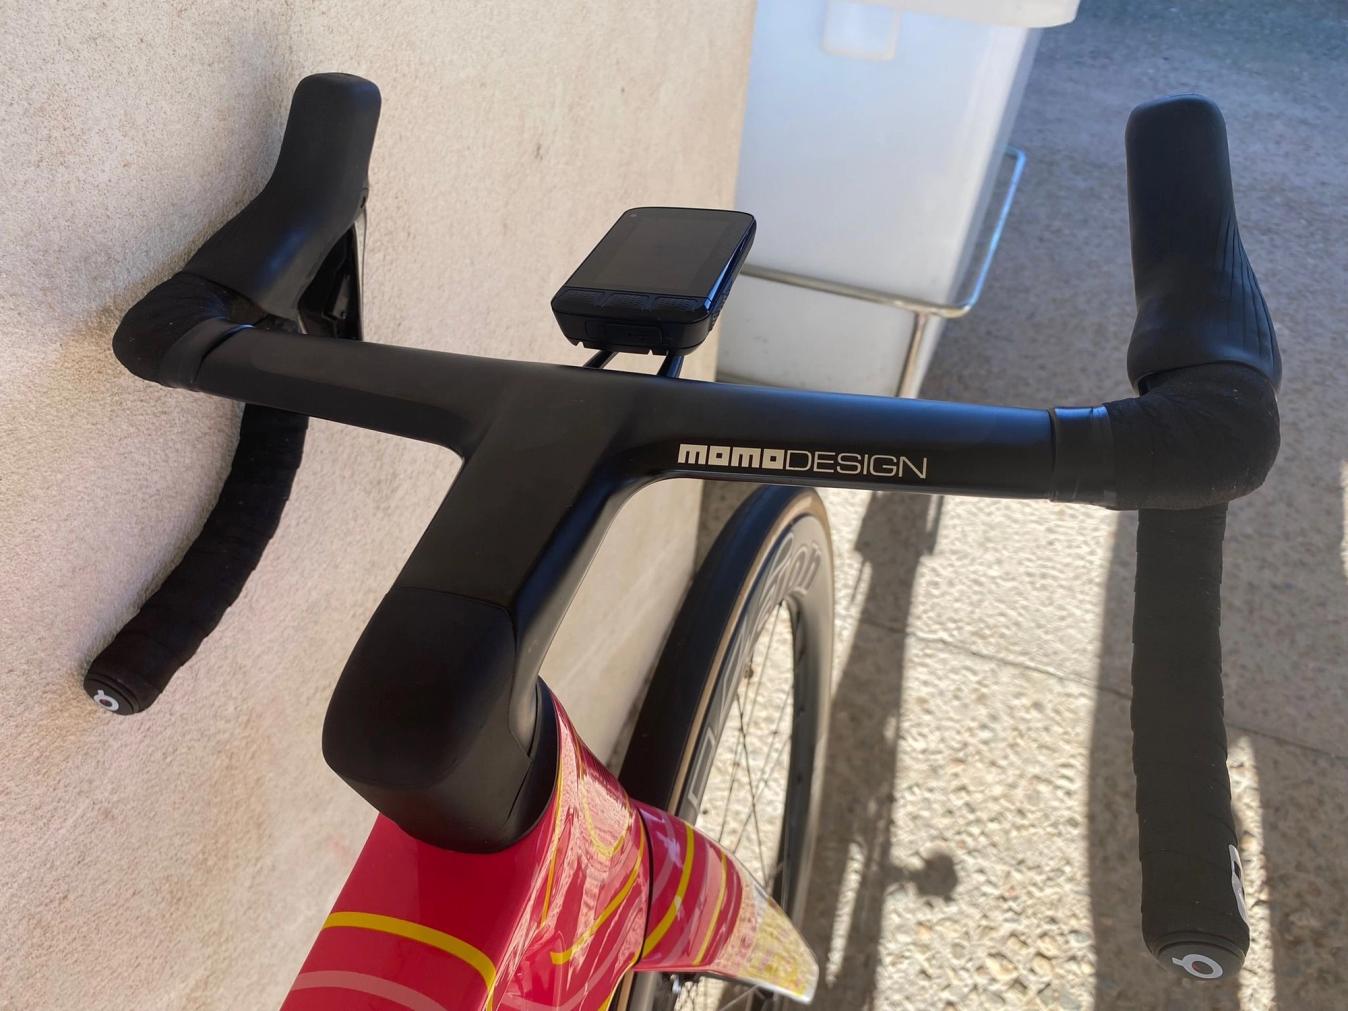 Carapaz will be using Cannondale's own in-house bar and stem with the Wahoo head unit and Prologo bar tape fitted to it